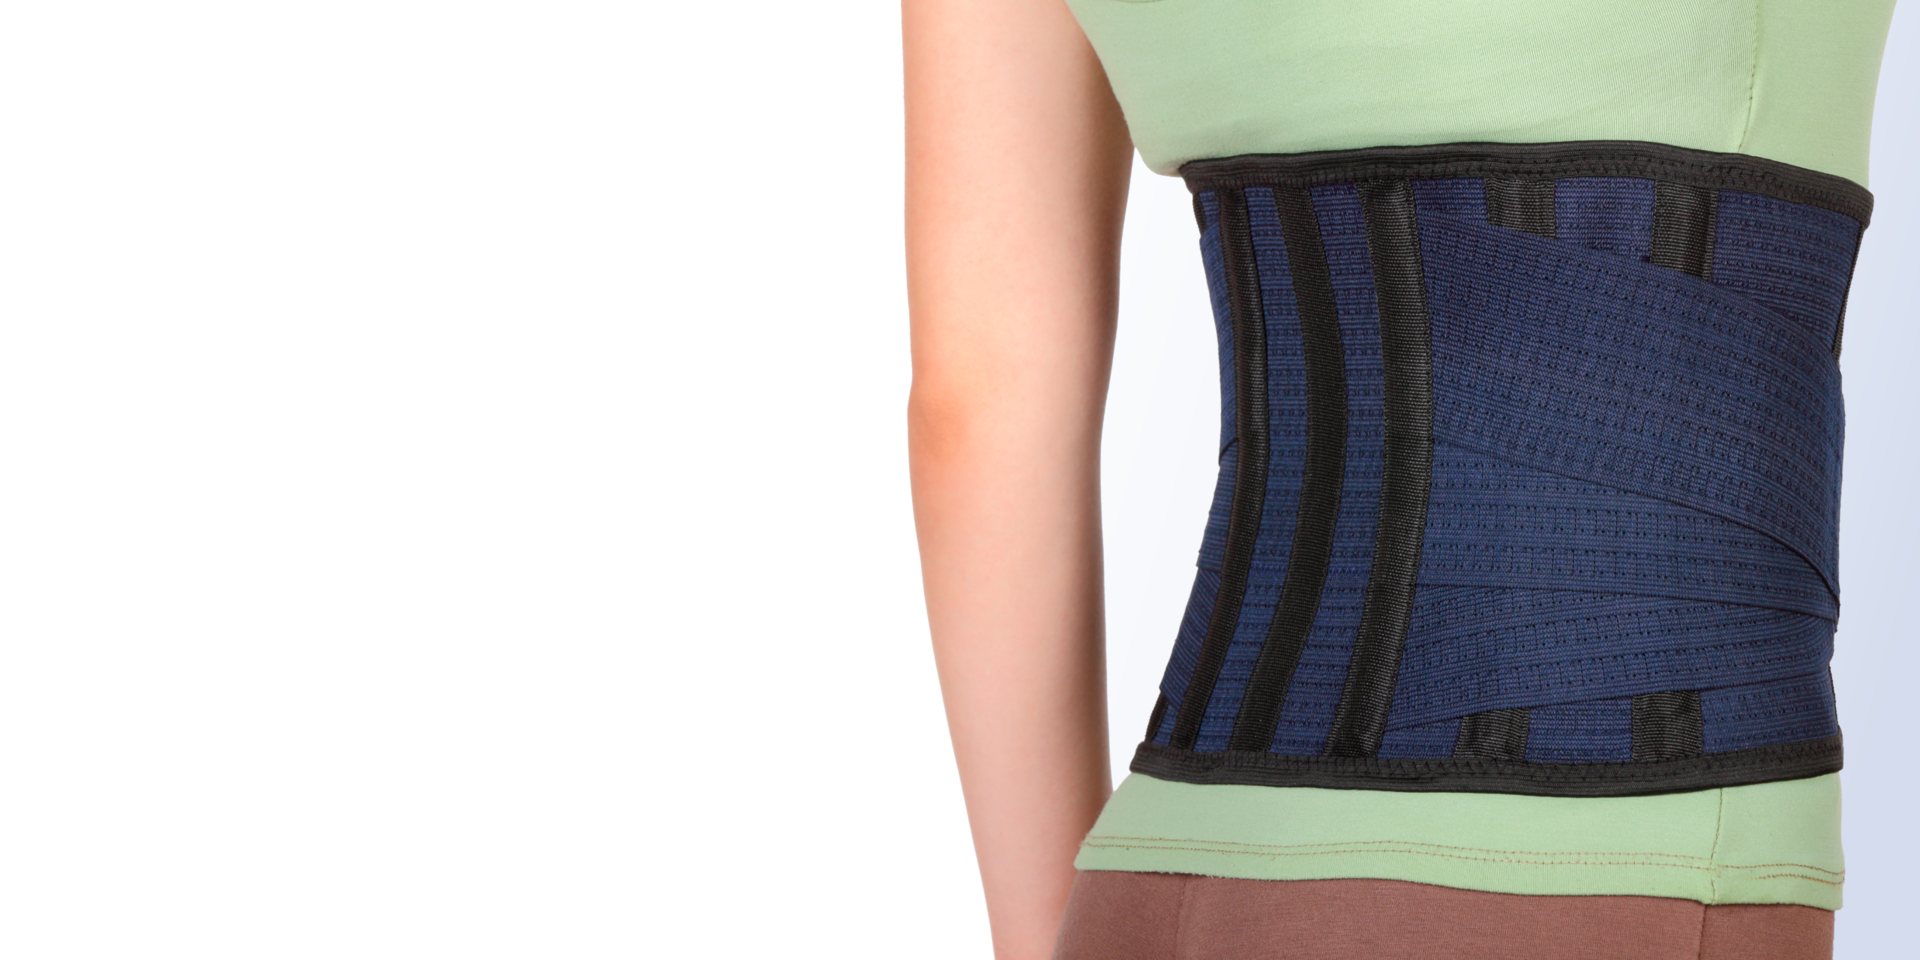 breathable back support brace for lower back pain relief by aveston